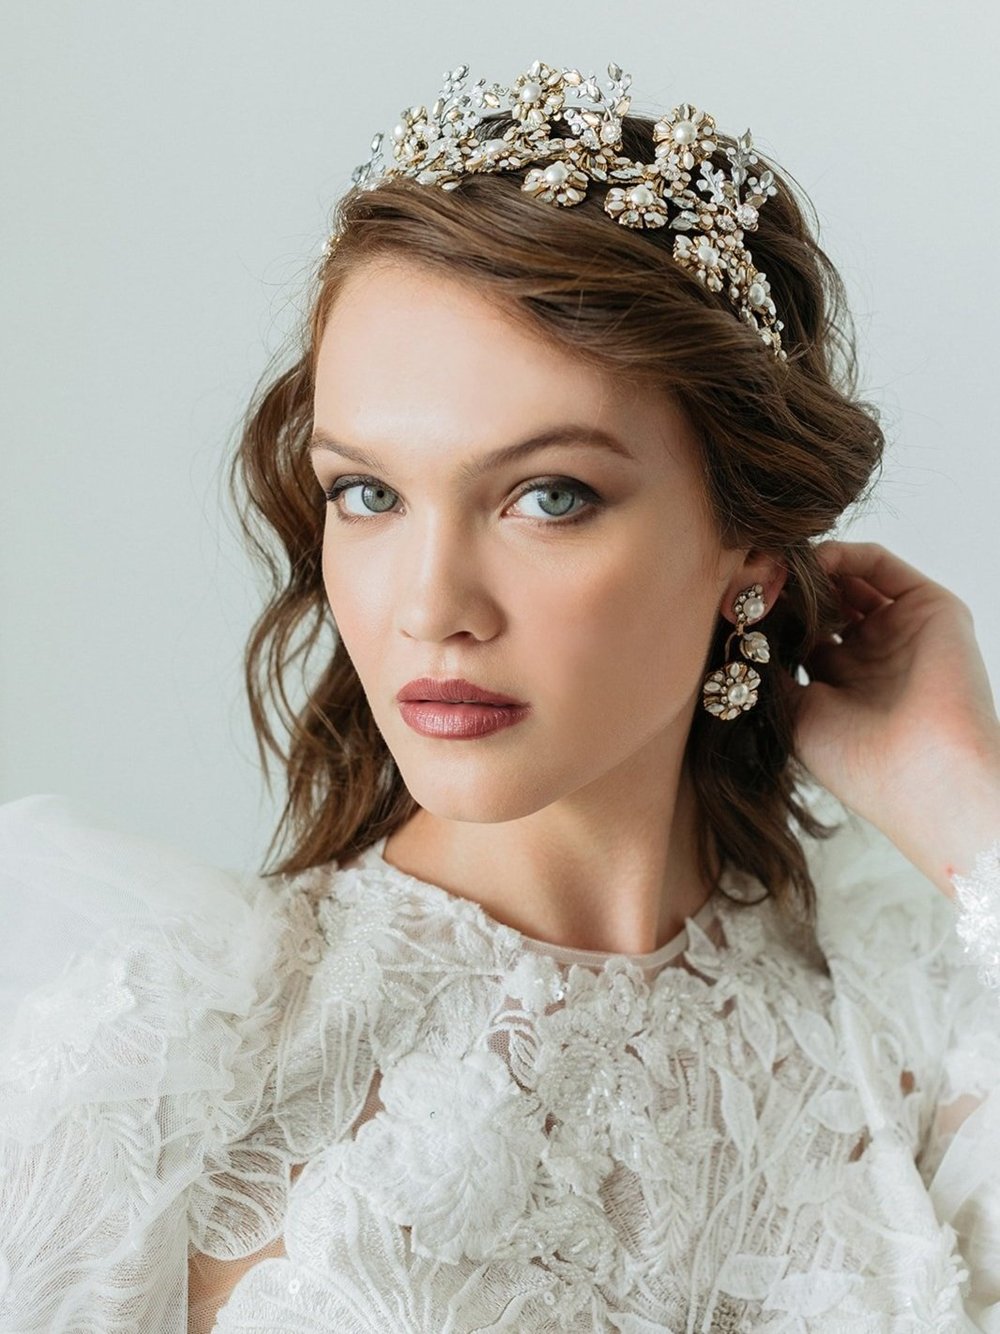 The Best Bridal Headpieces 2023. Alternatives to Traditional Veil. Wedding  Hair Ideas 2023. Statement Bridal Veils 2021. Bridal Hair Accessories 2023.  Wedding Blog. Wedding Hair Accessories 2023.